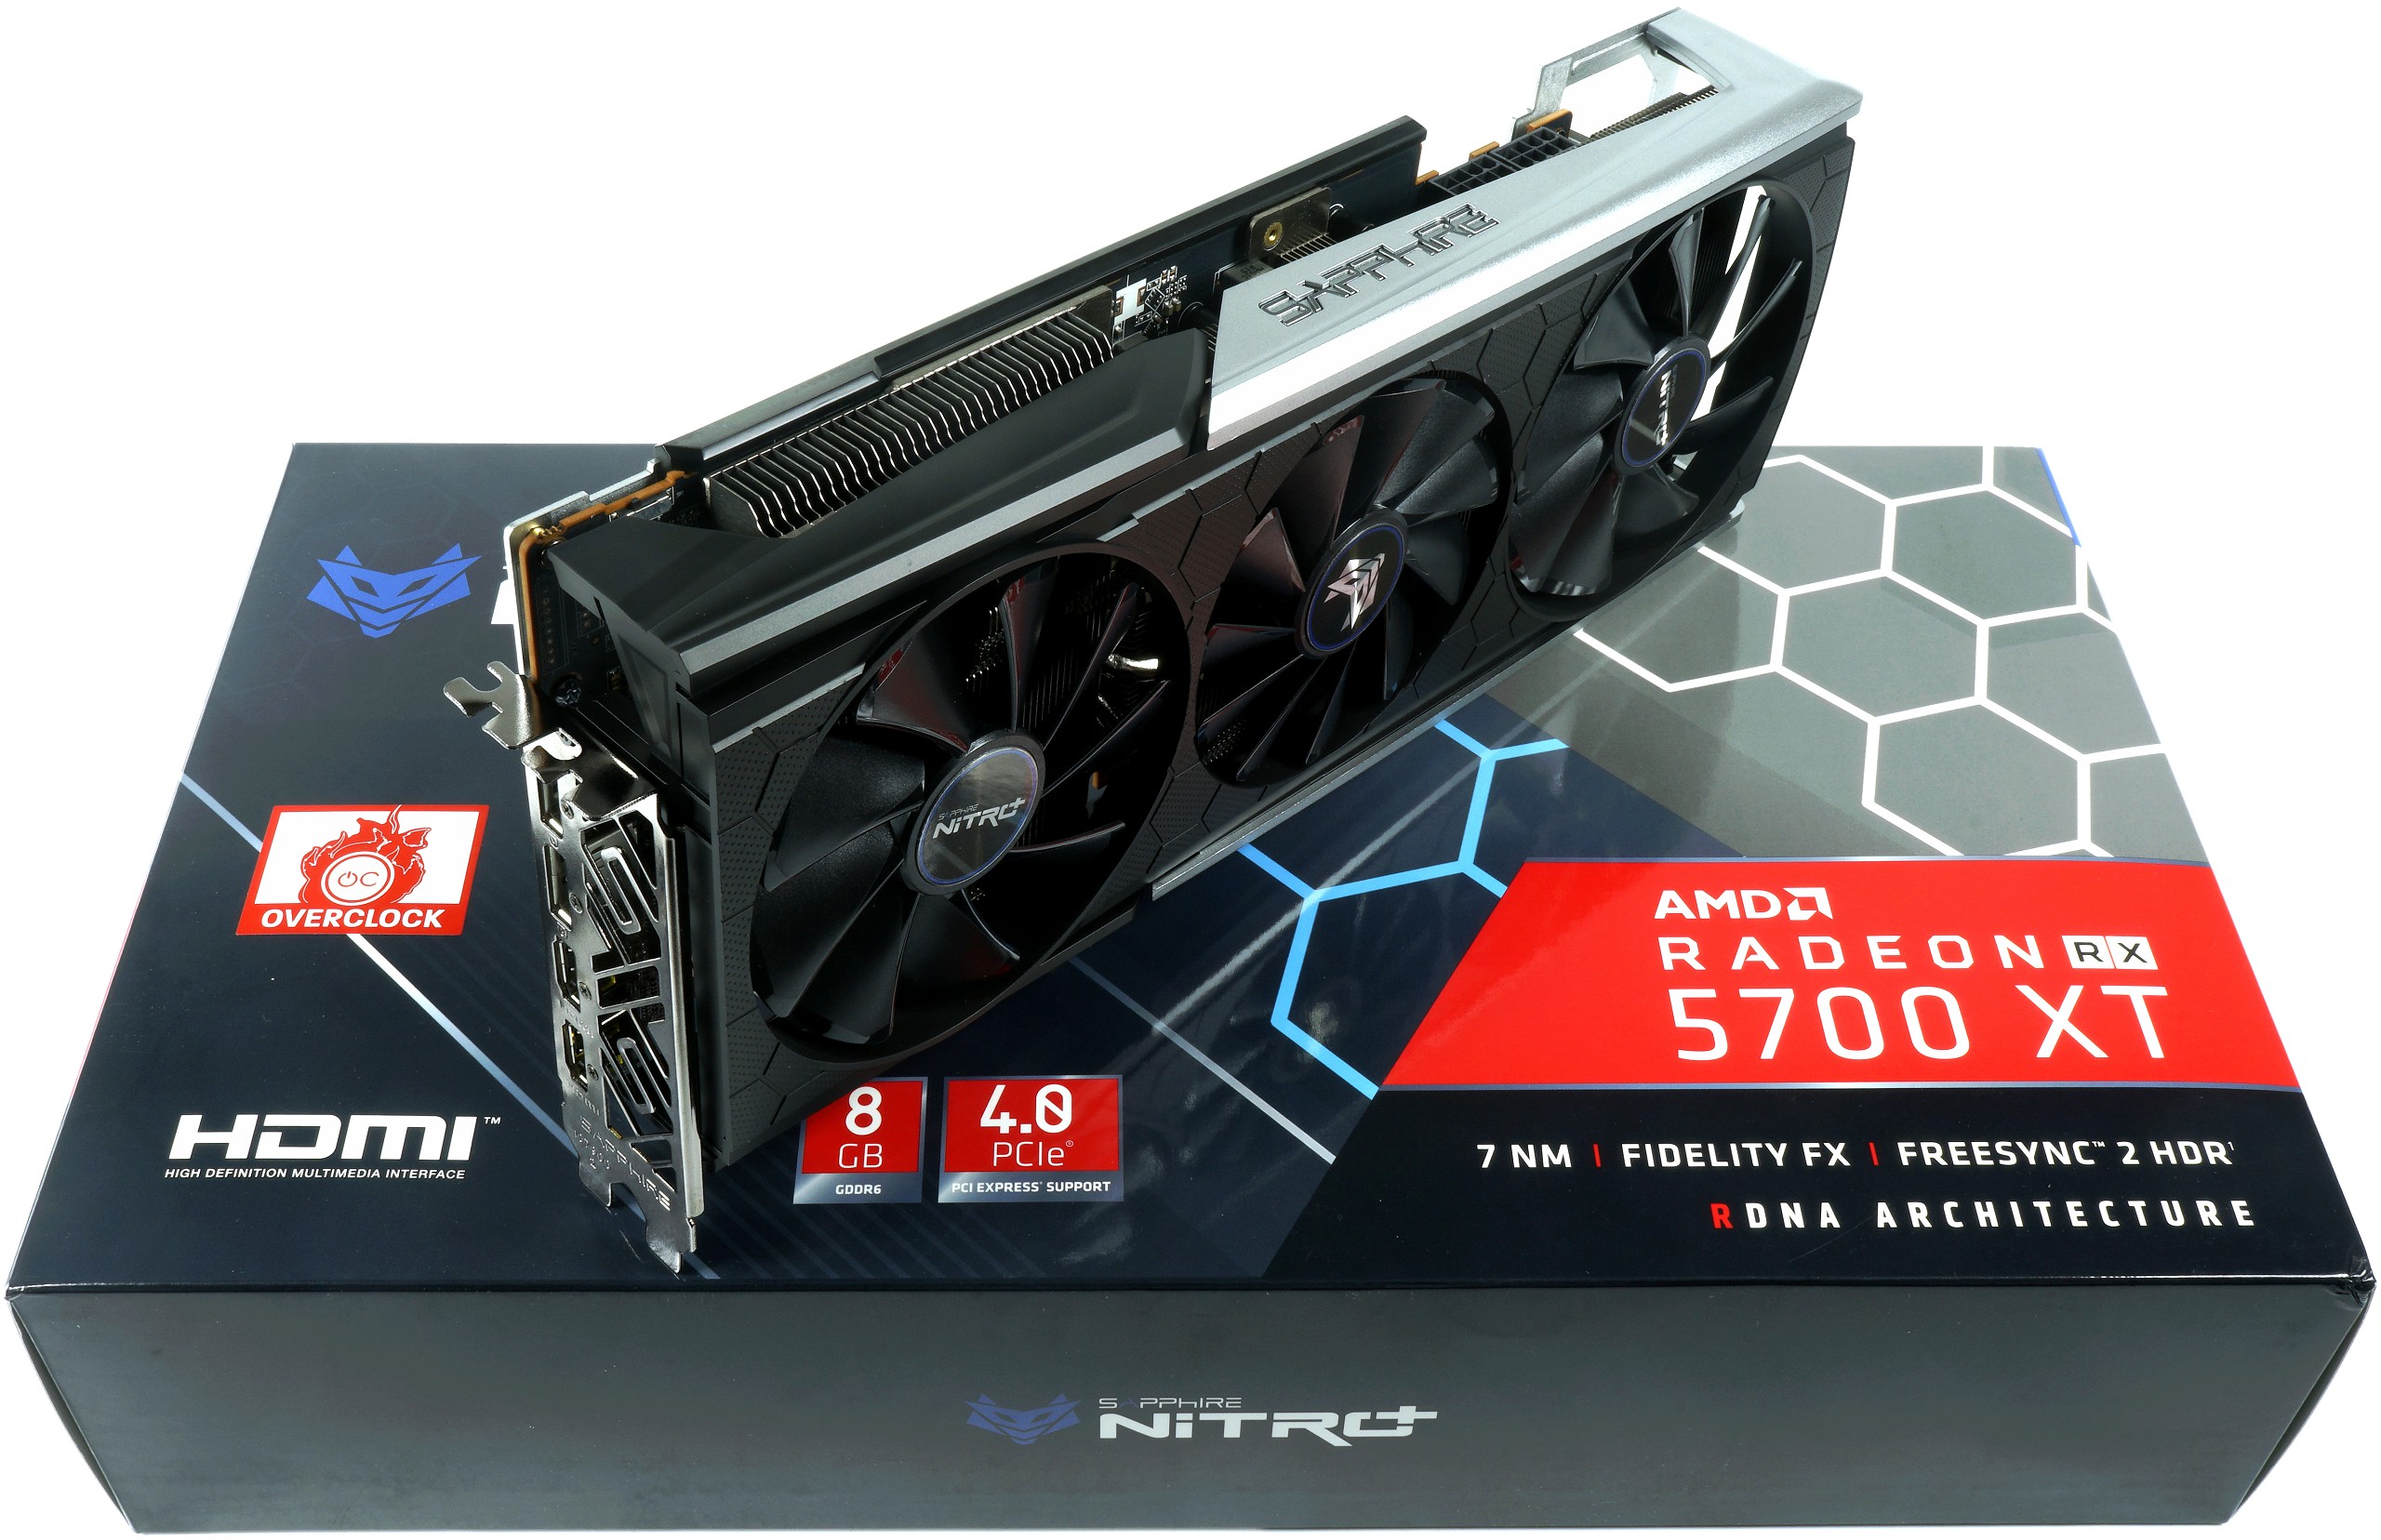 Sapphire Rx 5700 Xt Nitro Plus In Test Sprinting Better With Less Weight And The Best Navi Card So Far Igor Slab